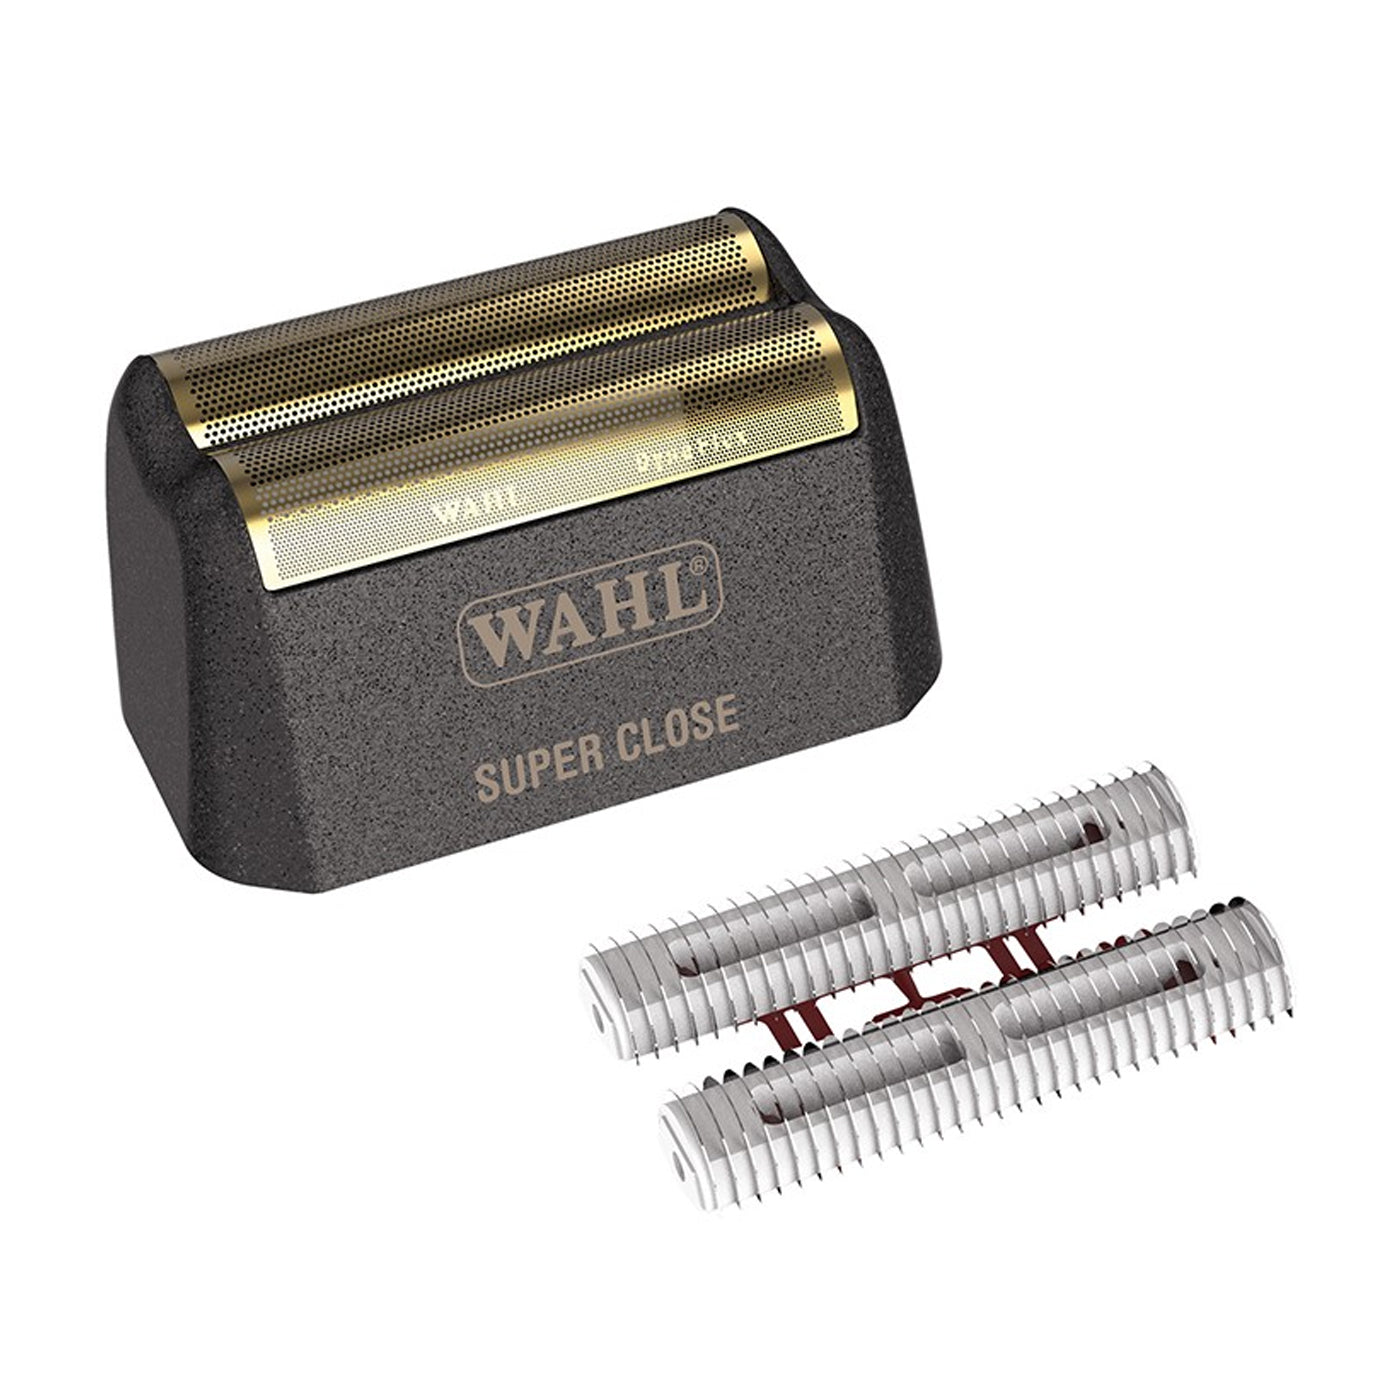 Wahl 5 Star Series Vanish Double Foil Corded/Cordless Shaver 8173-700 - NEW  43917027951